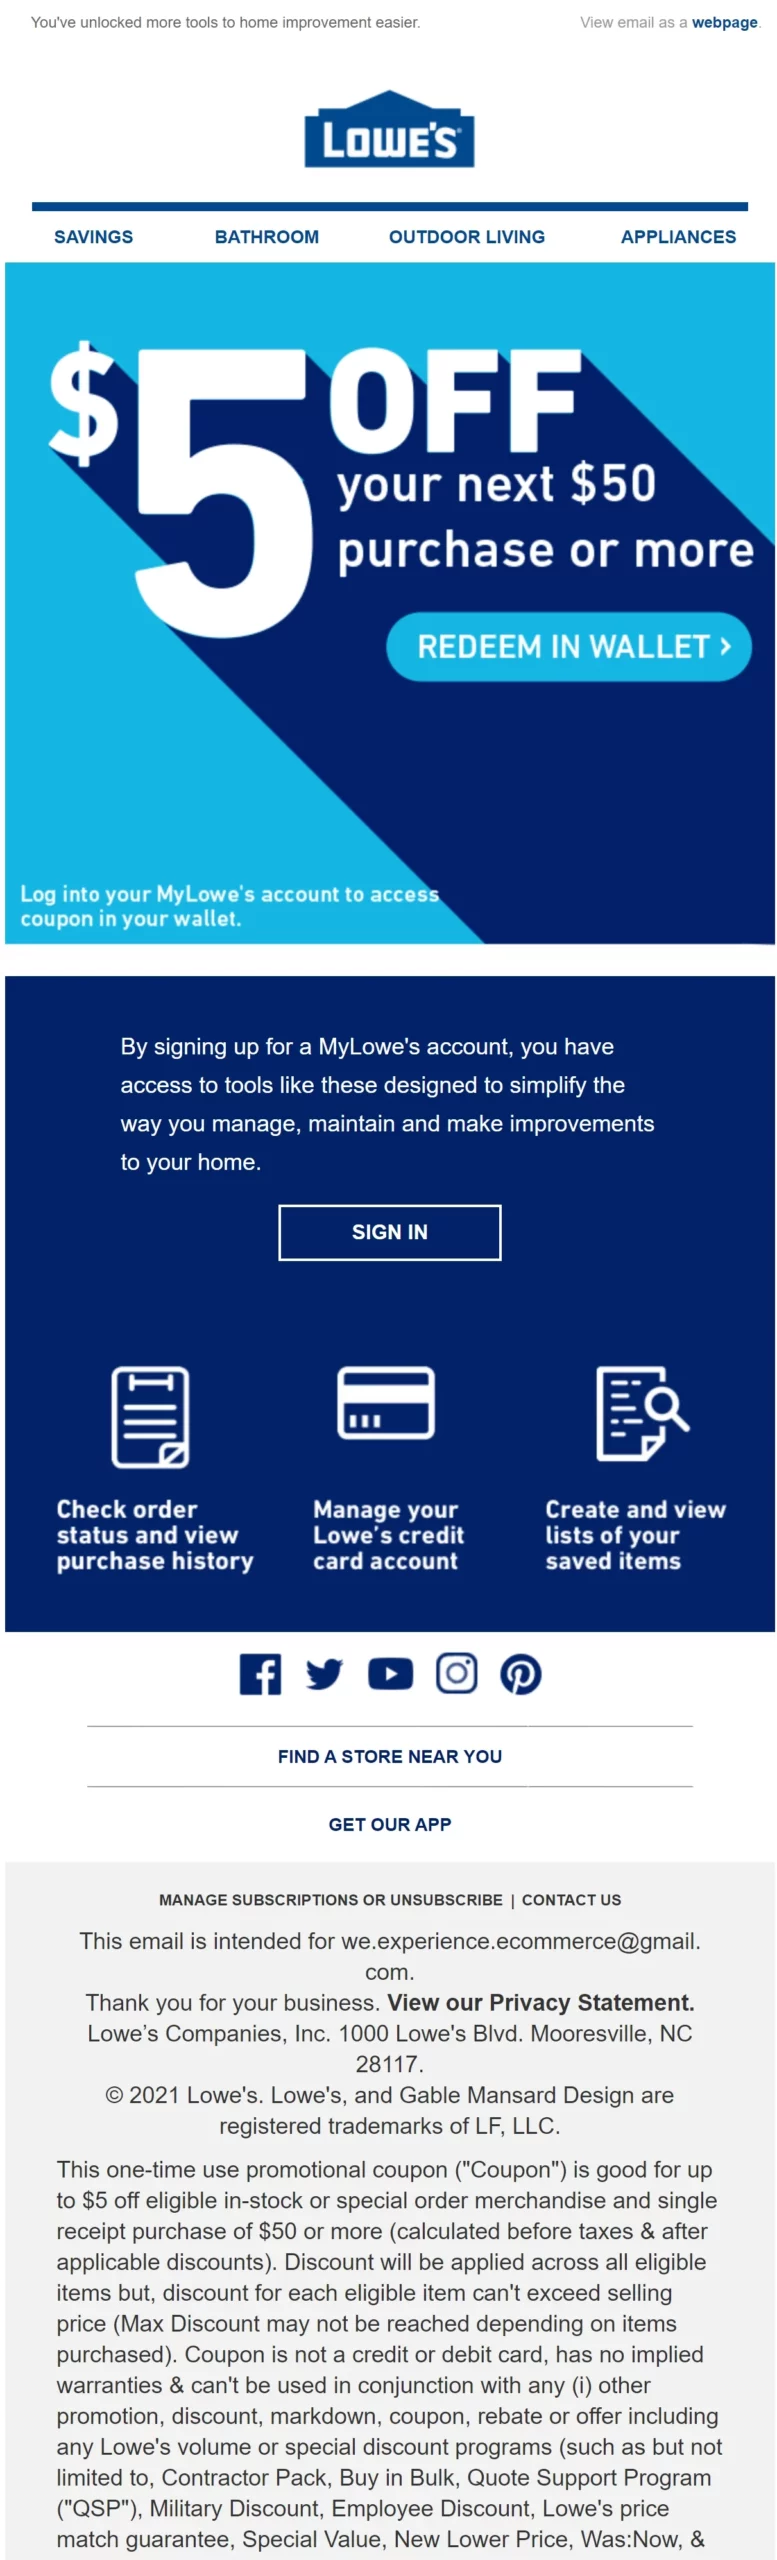 lowes welcome email